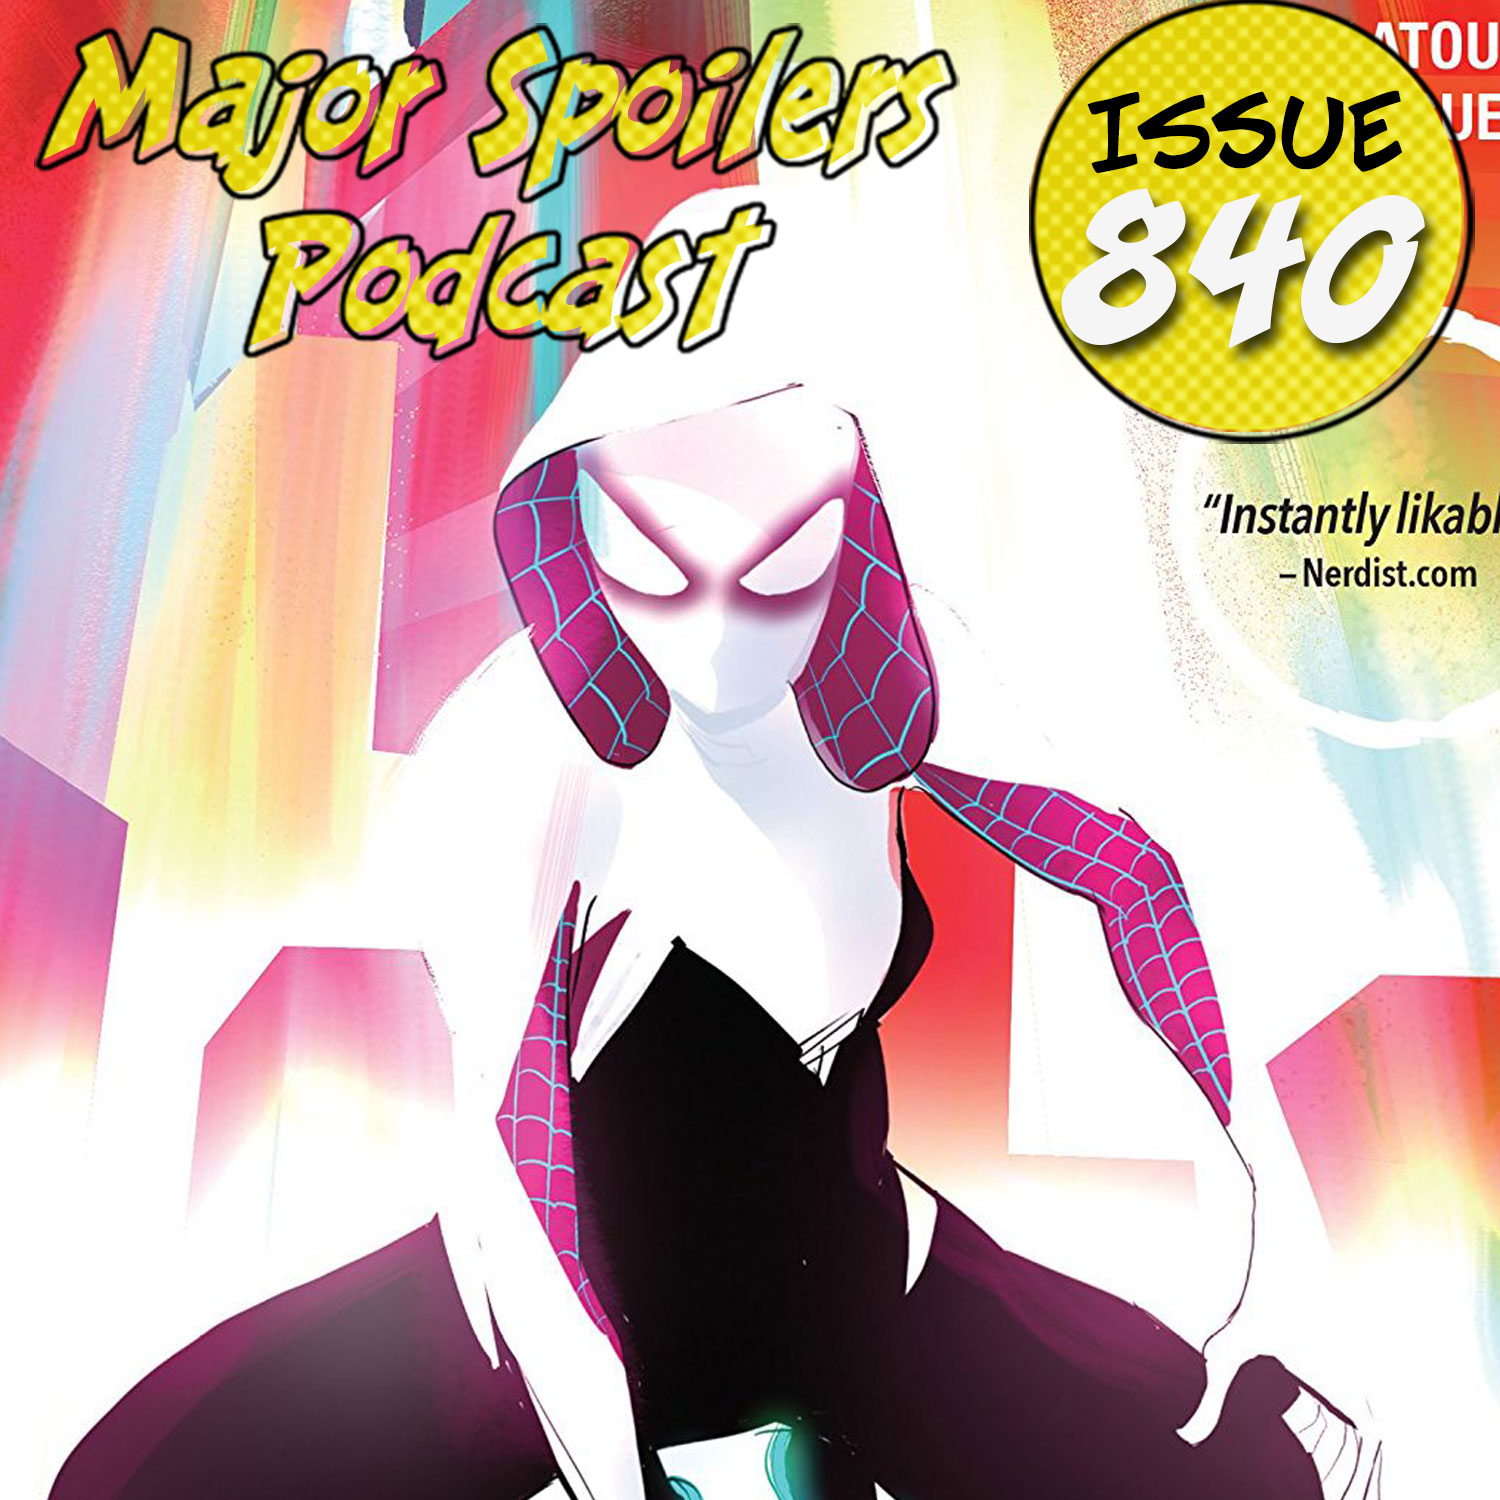 Major Spoilers Podcast #840: Spider-Gwen: Most Wanted